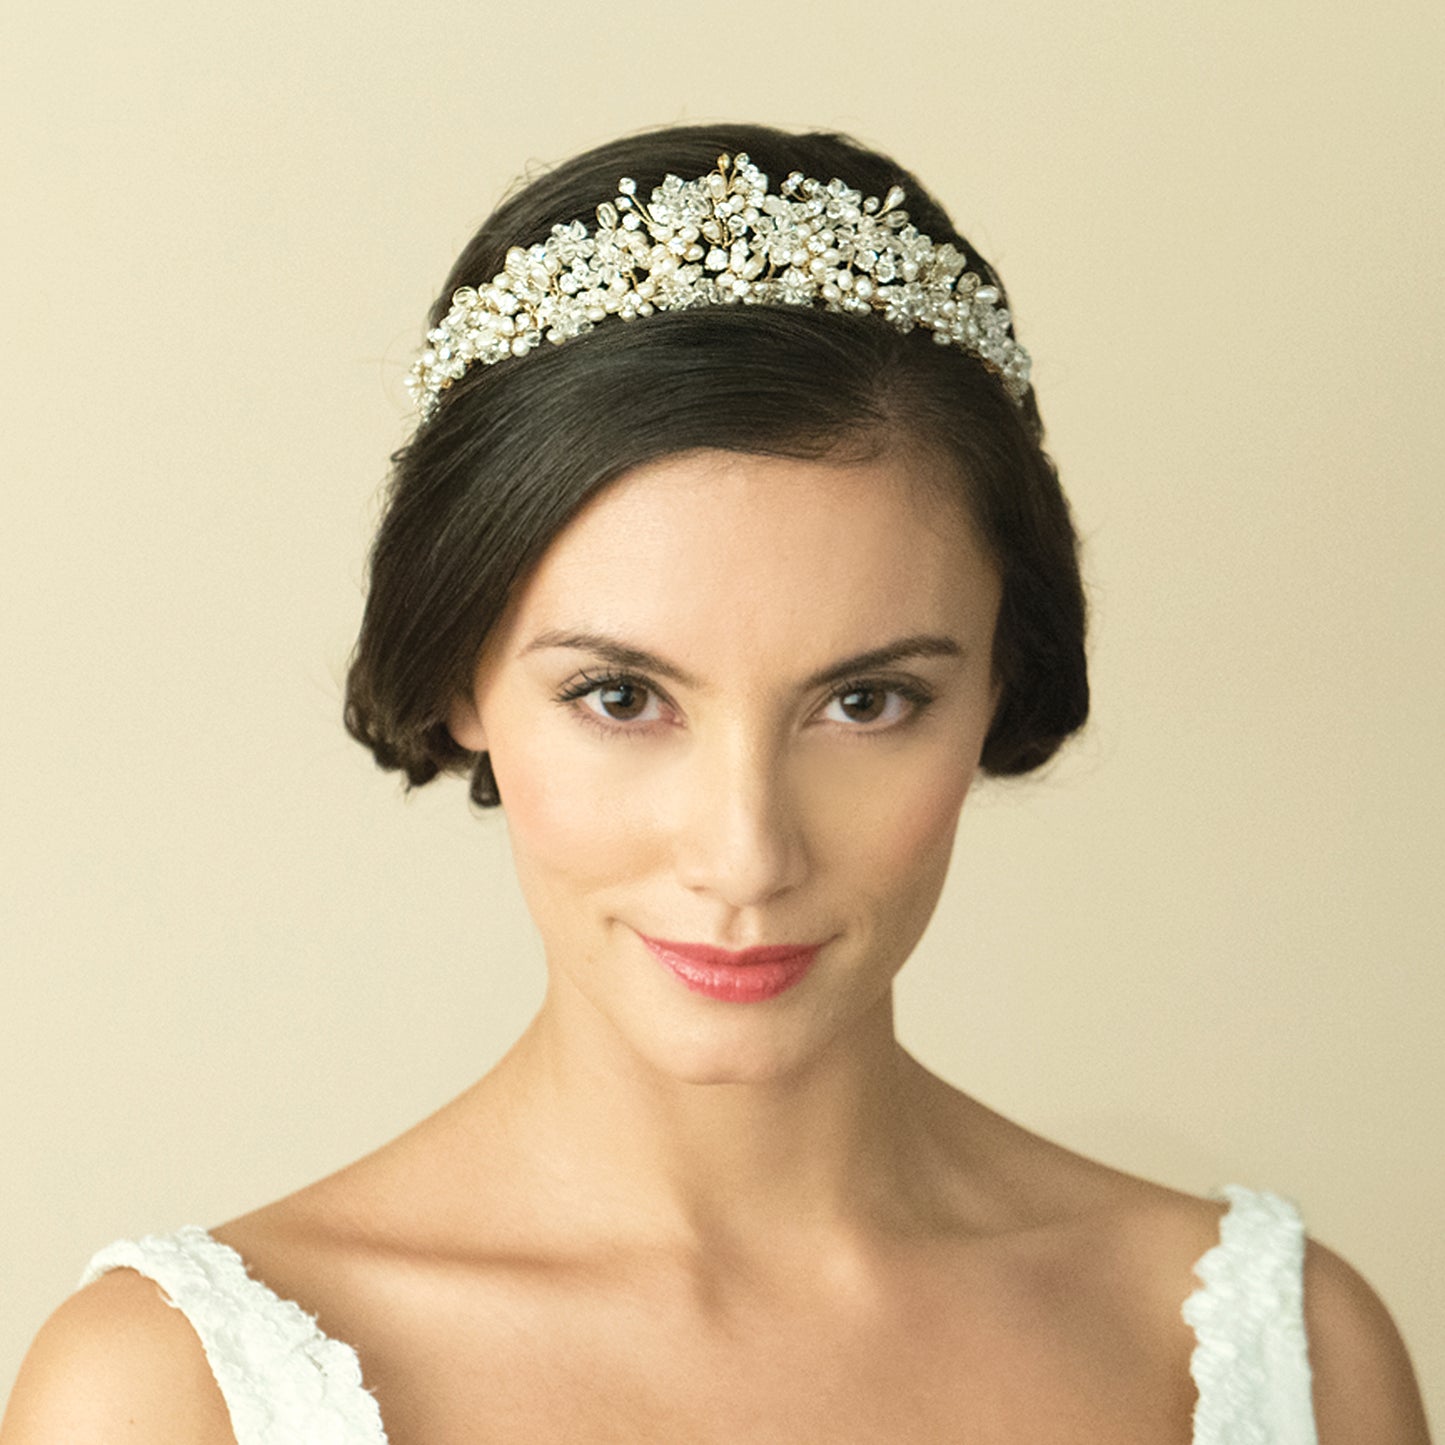 Emmerald - Gold Crystal and Pearl Luminous Statement Tiara